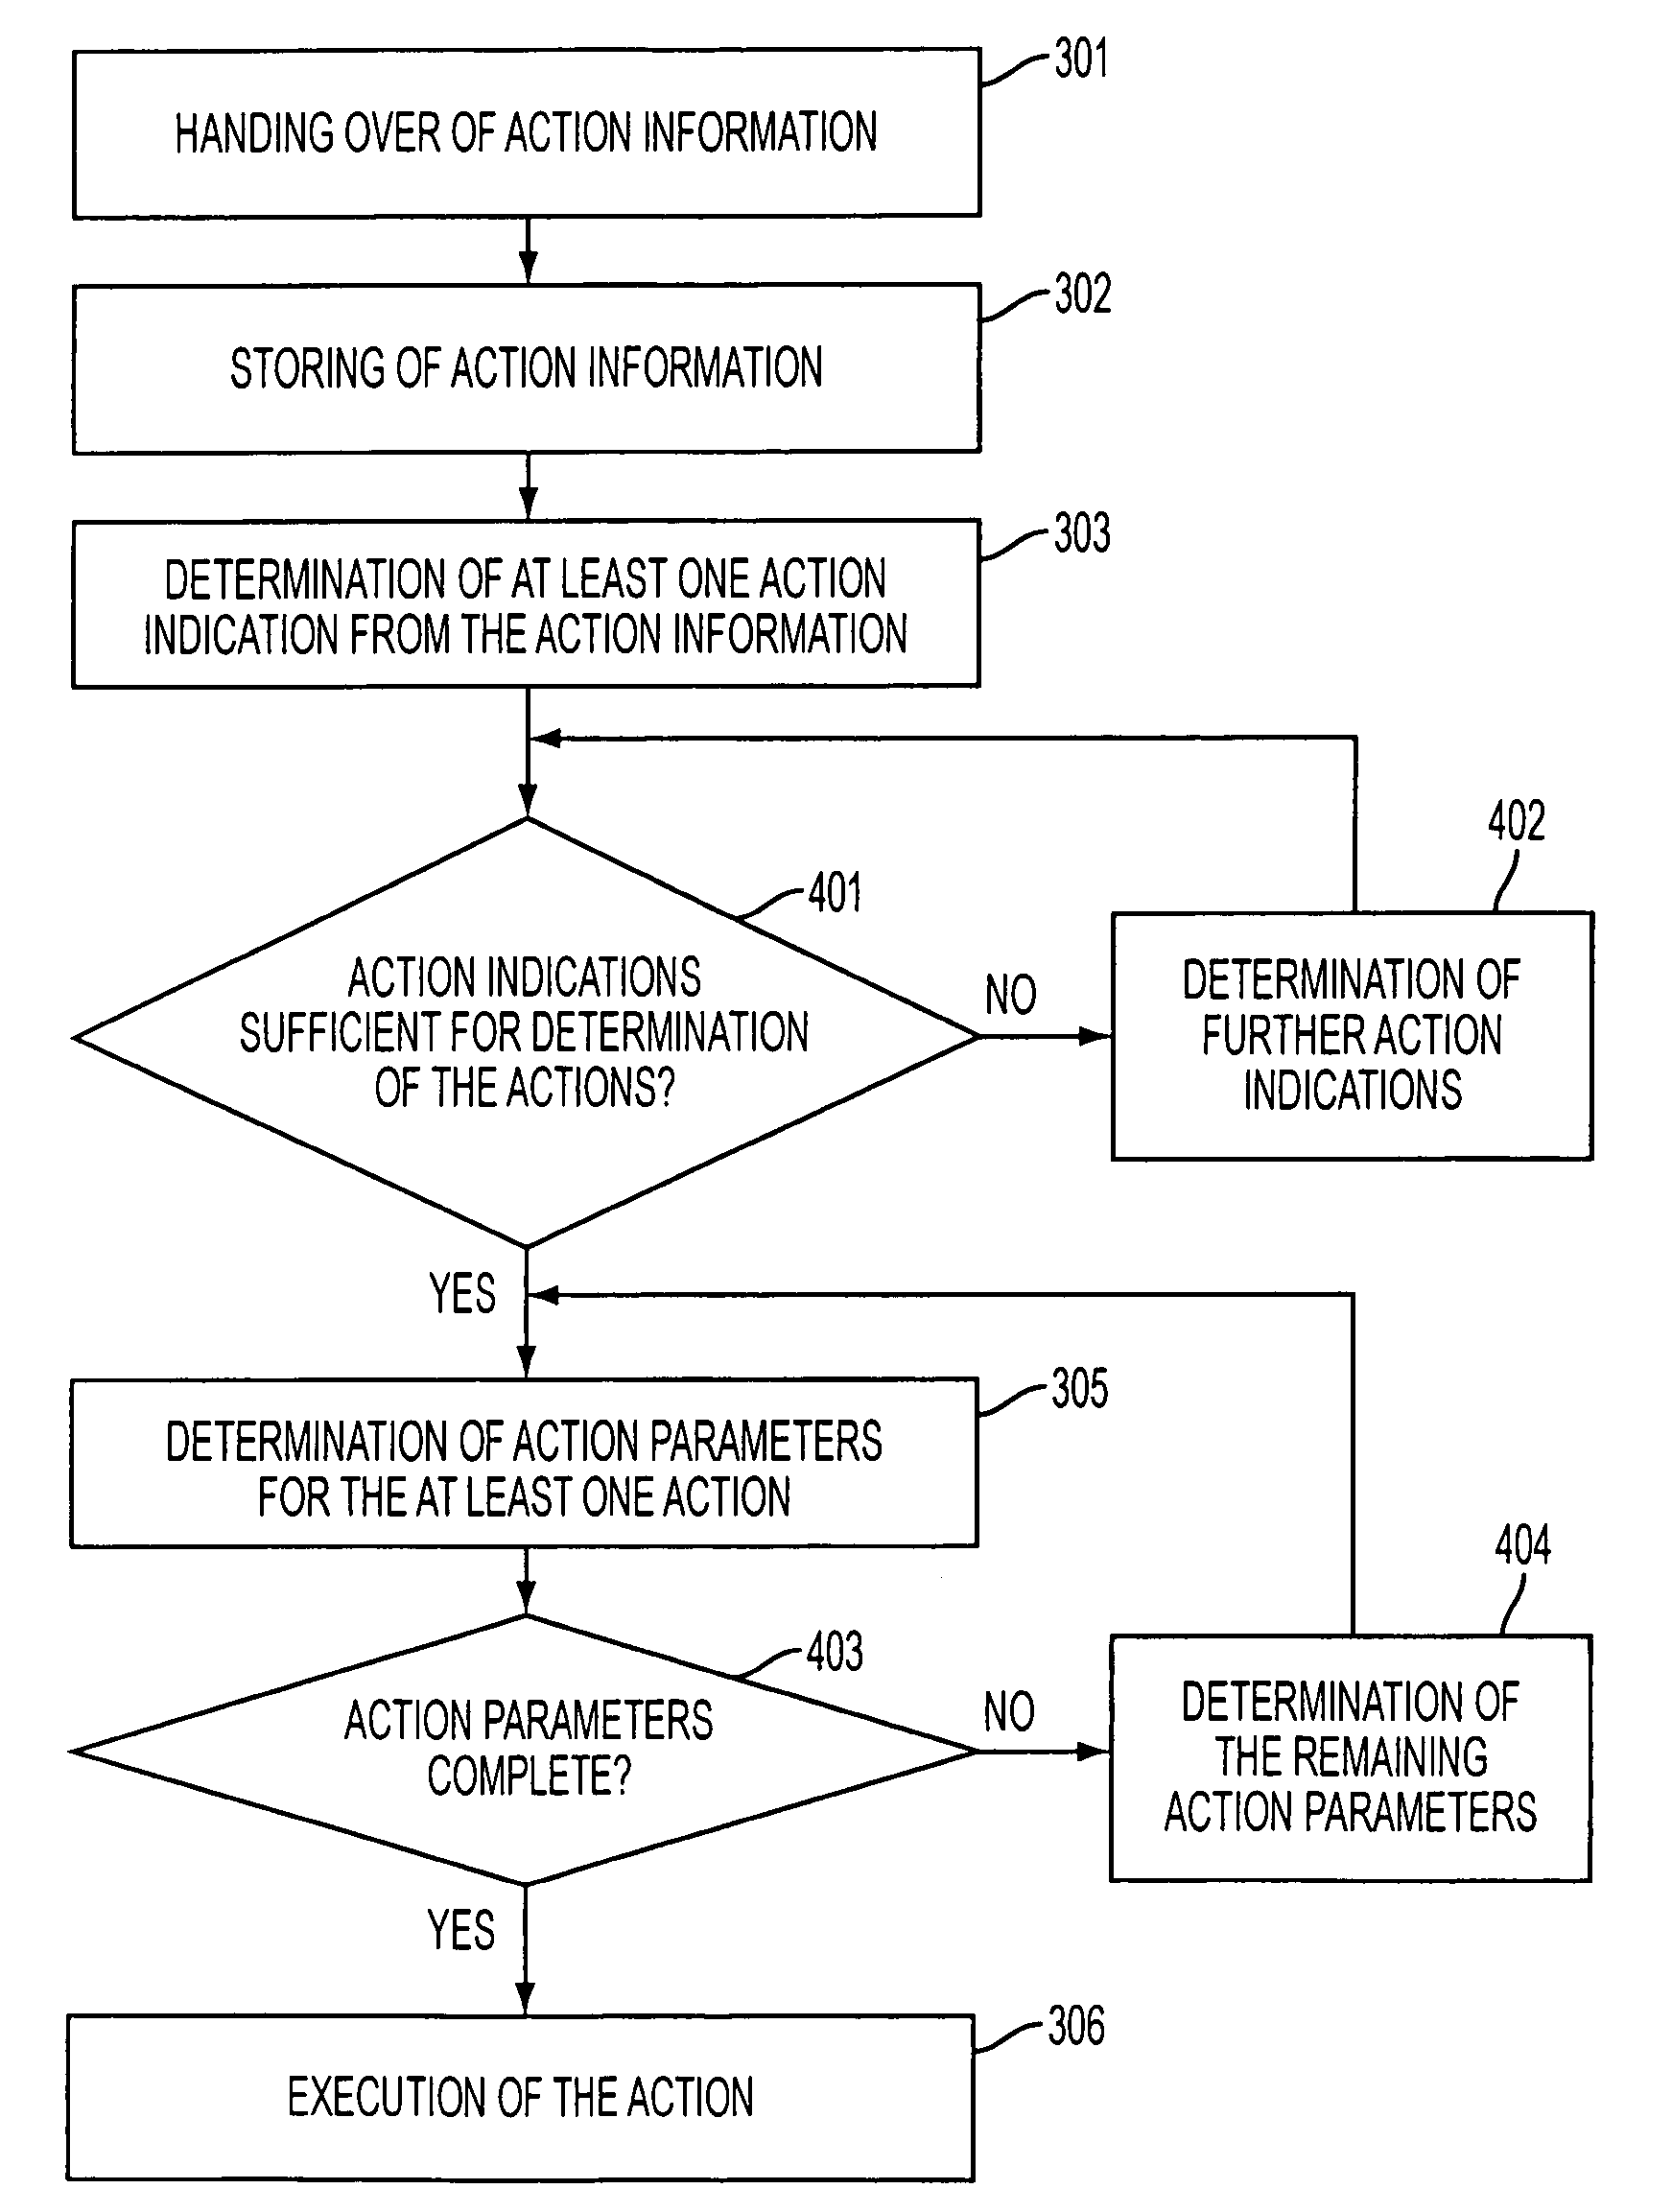 Speech-processing system and method